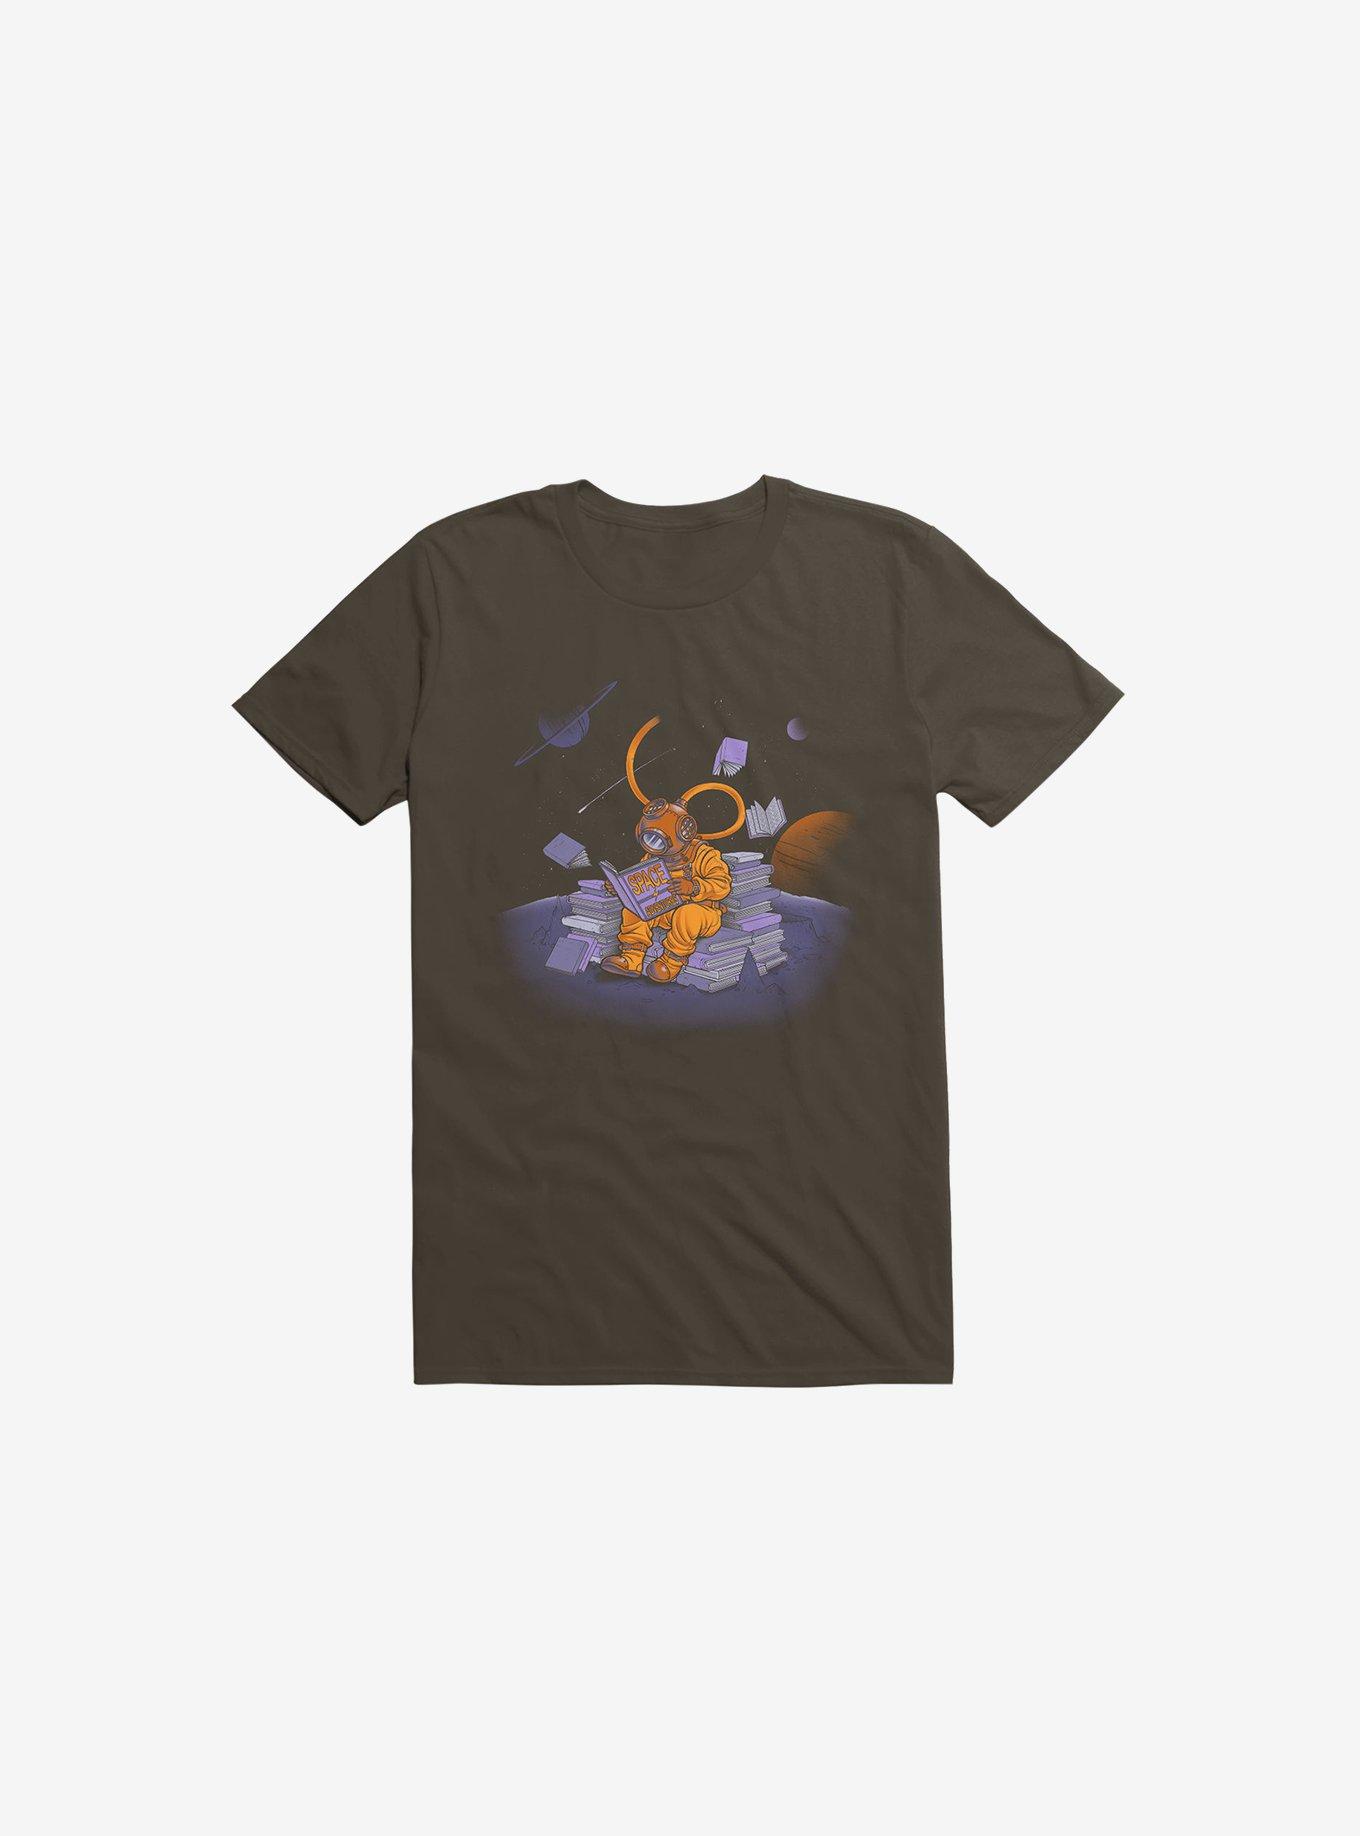 A Reader Lives A Thousand Lives: Diving Space Adventures T-Shirt, BROWN, hi-res